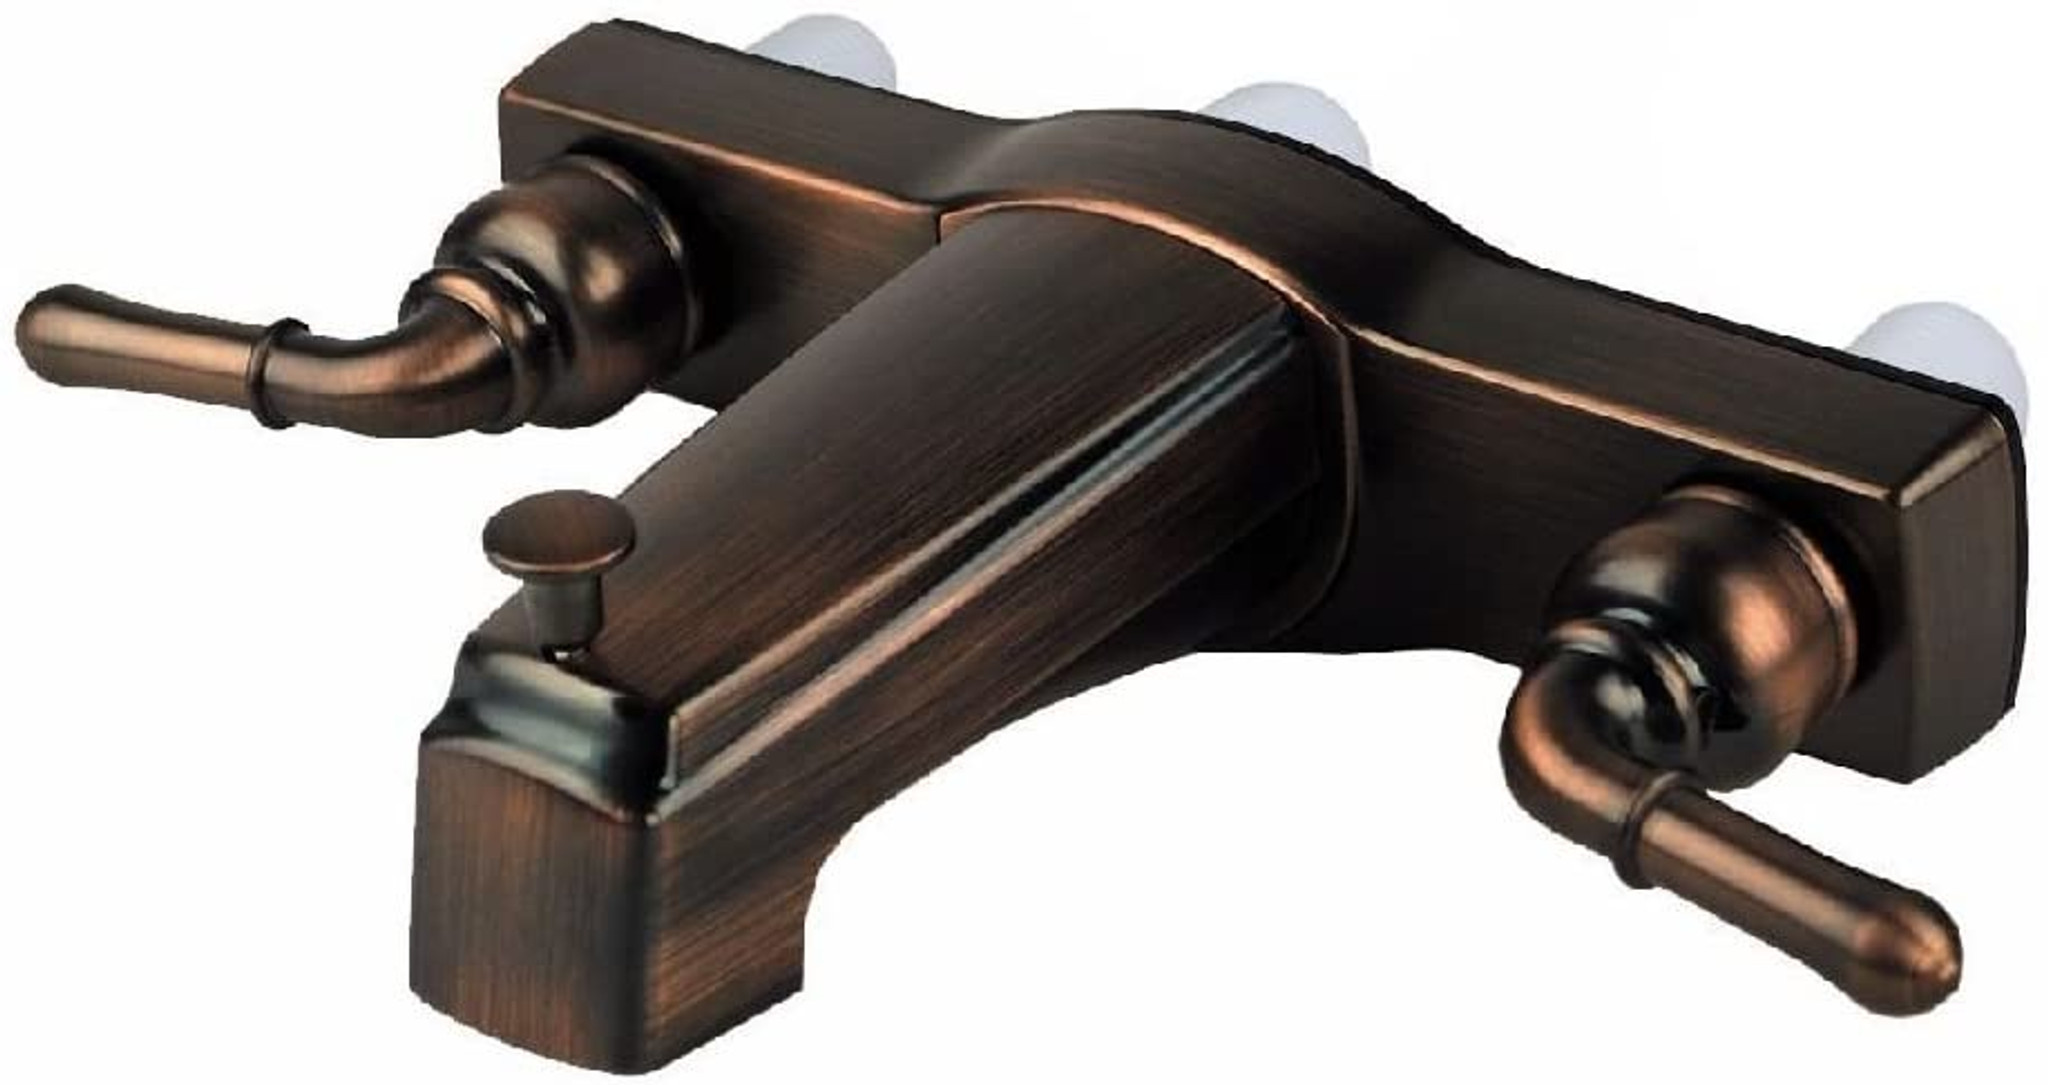 Empire 8 Oil Rubbed Bronze Tub Shower Faucet With Lever Handles